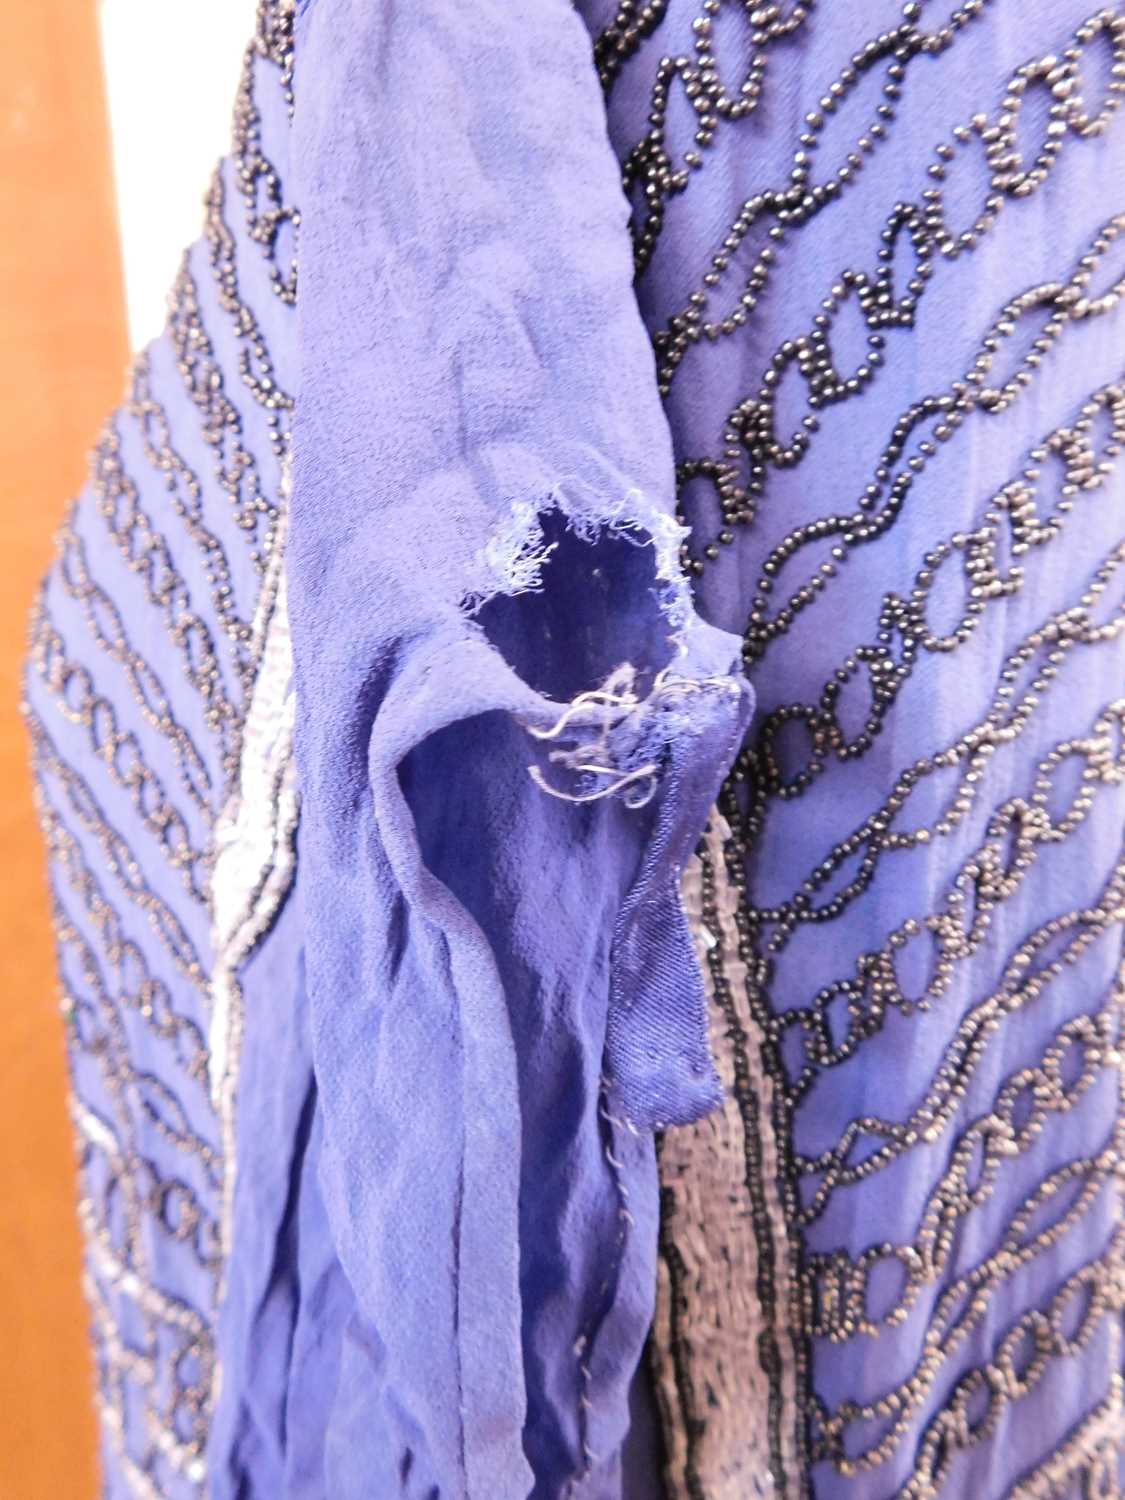 An Edwardian beaded dress, the blue chiffon dress with allover beaded detail, sleeveless - Image 7 of 14